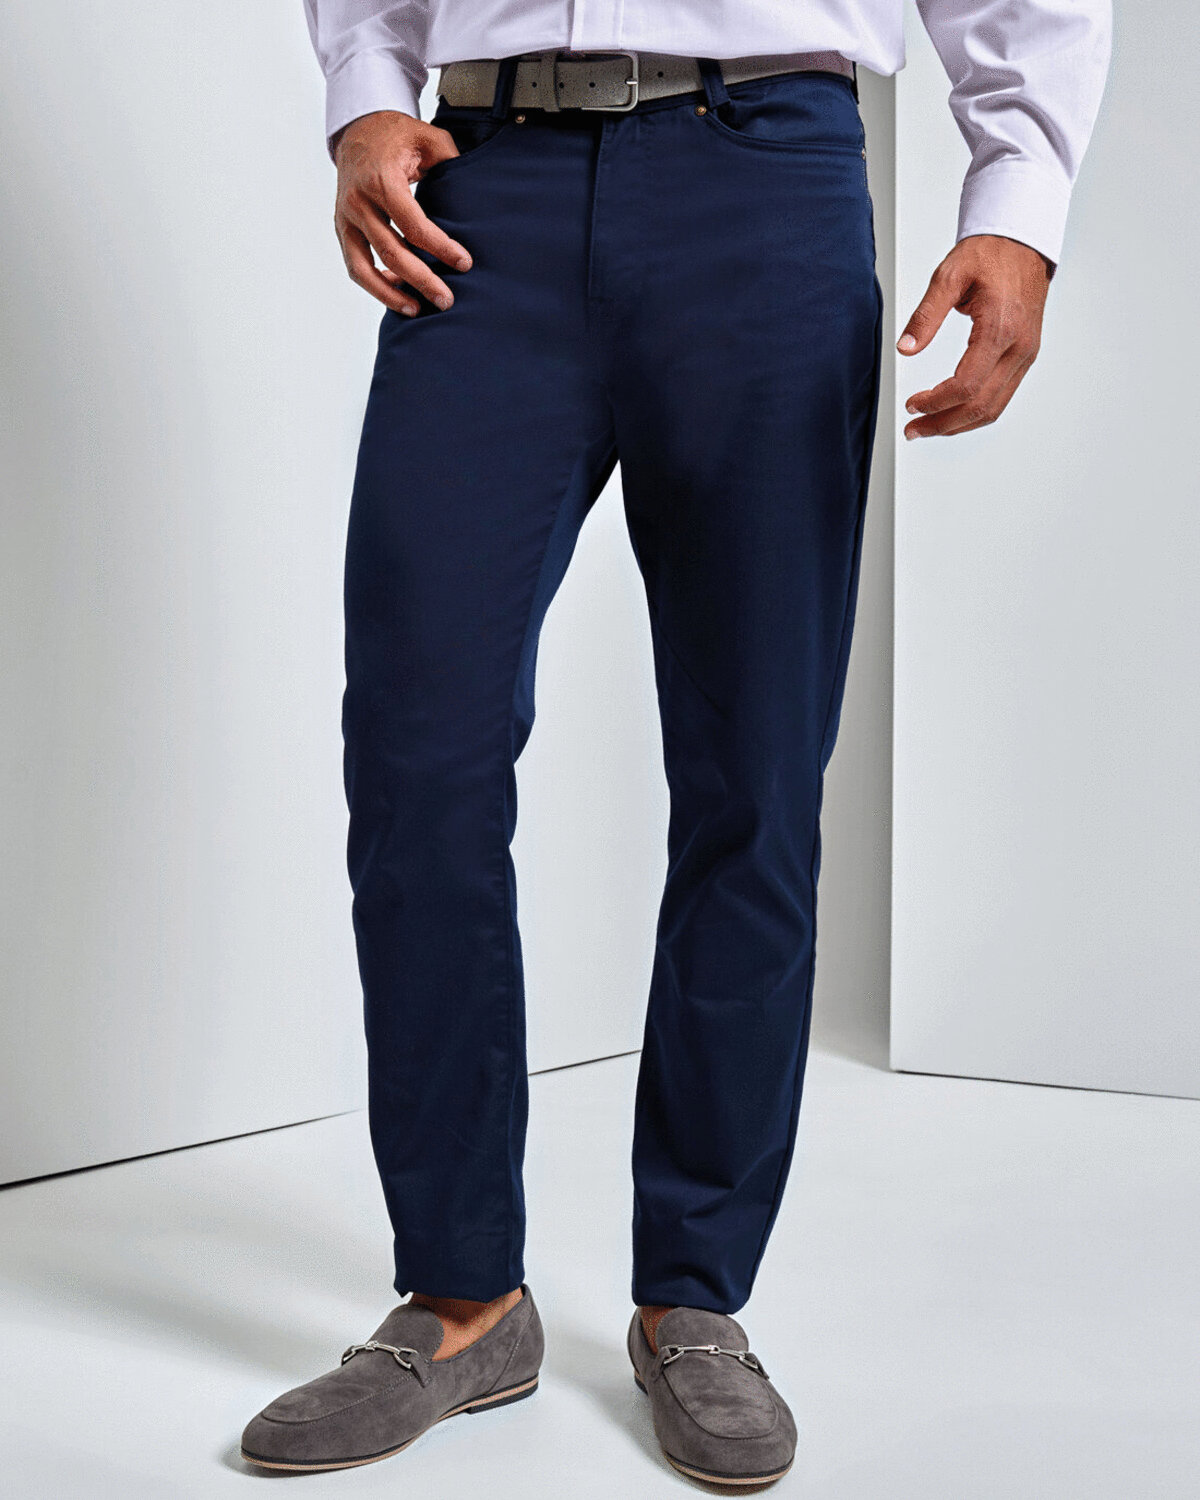 MENS PERFORMANCE CHINO JEANS